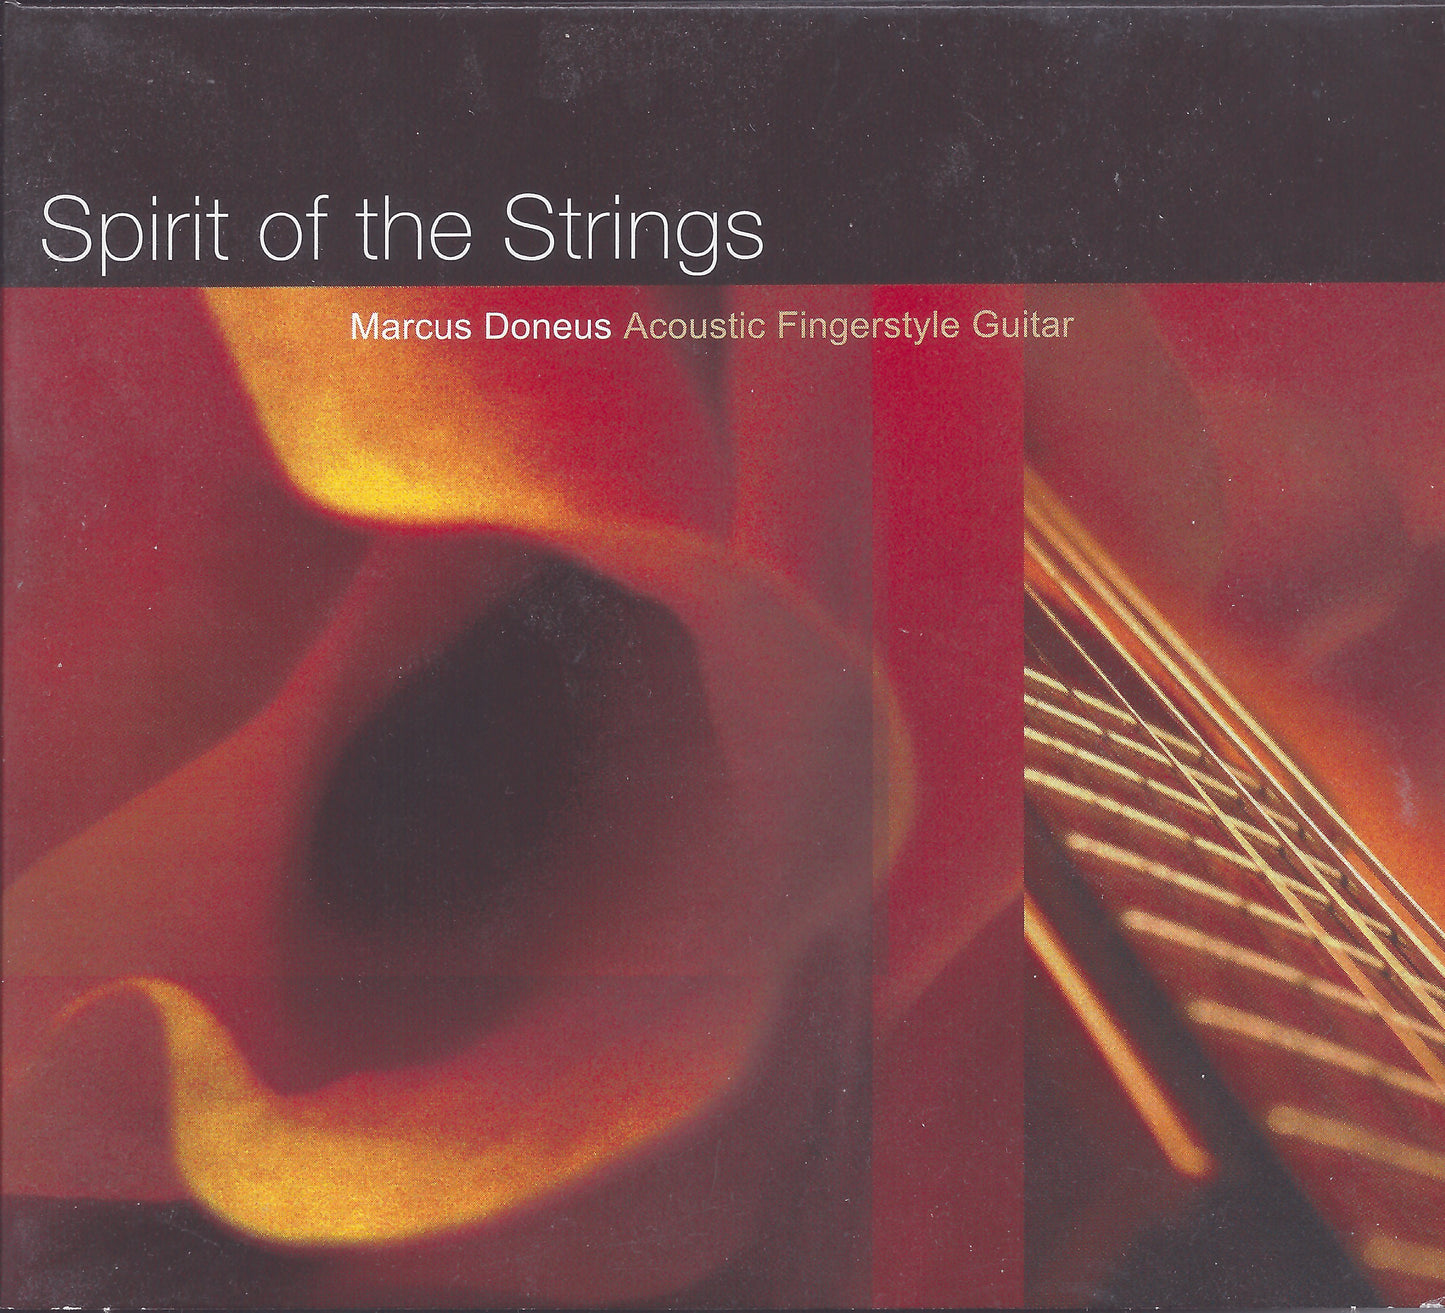 Marcus Doneus - Spirit of the Strings (Acoustic Fingerstyle Guitar) CD